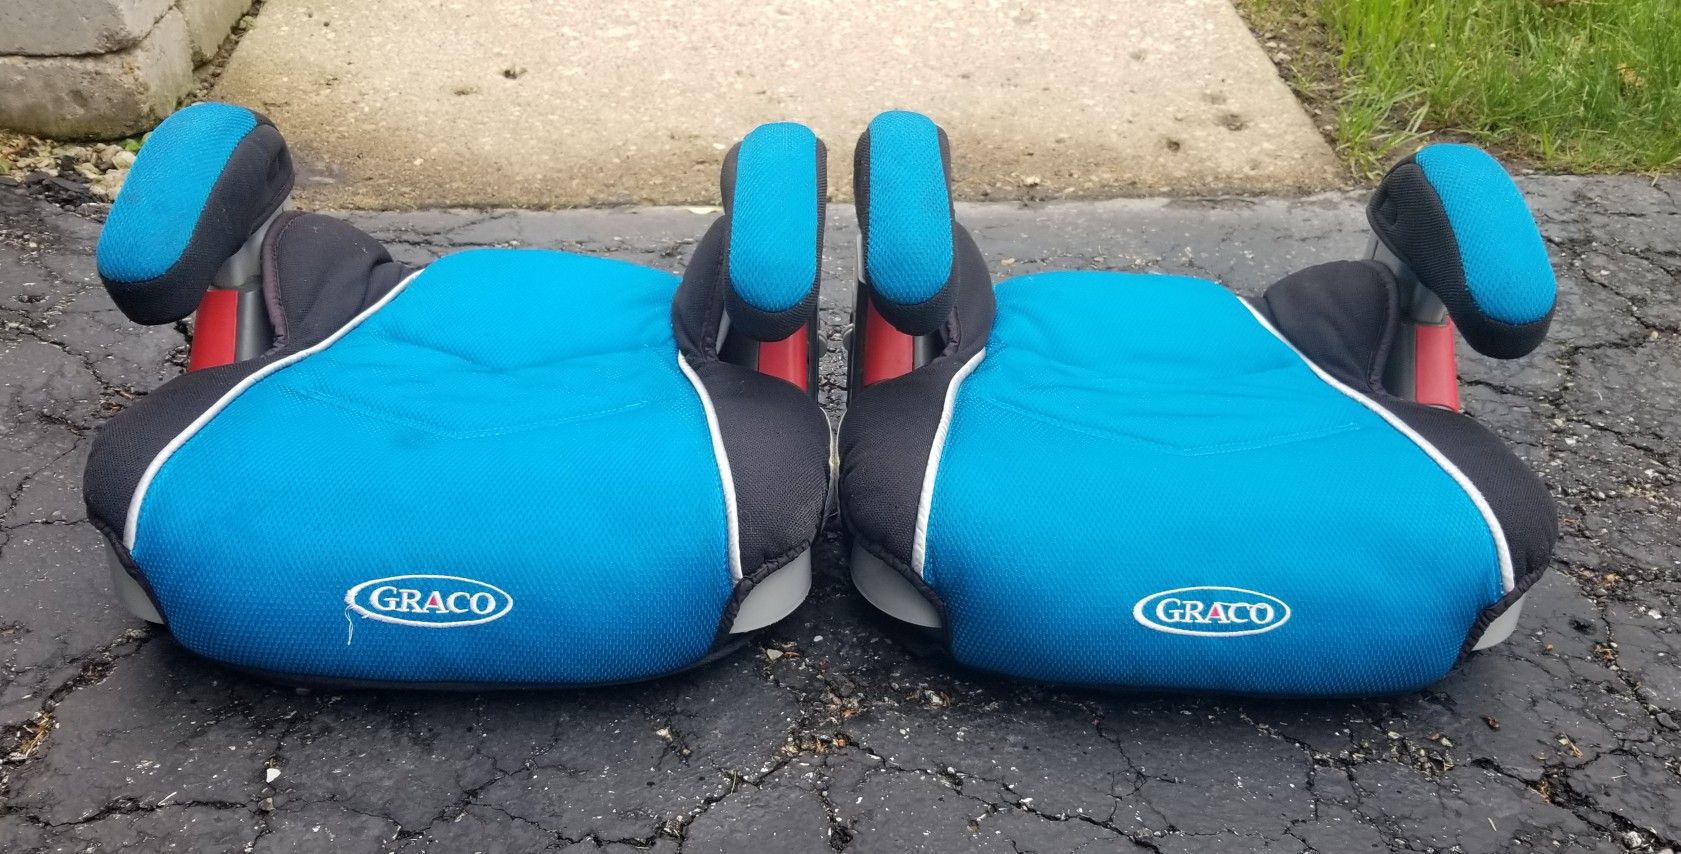 Set of 2 Graco Booster Seats